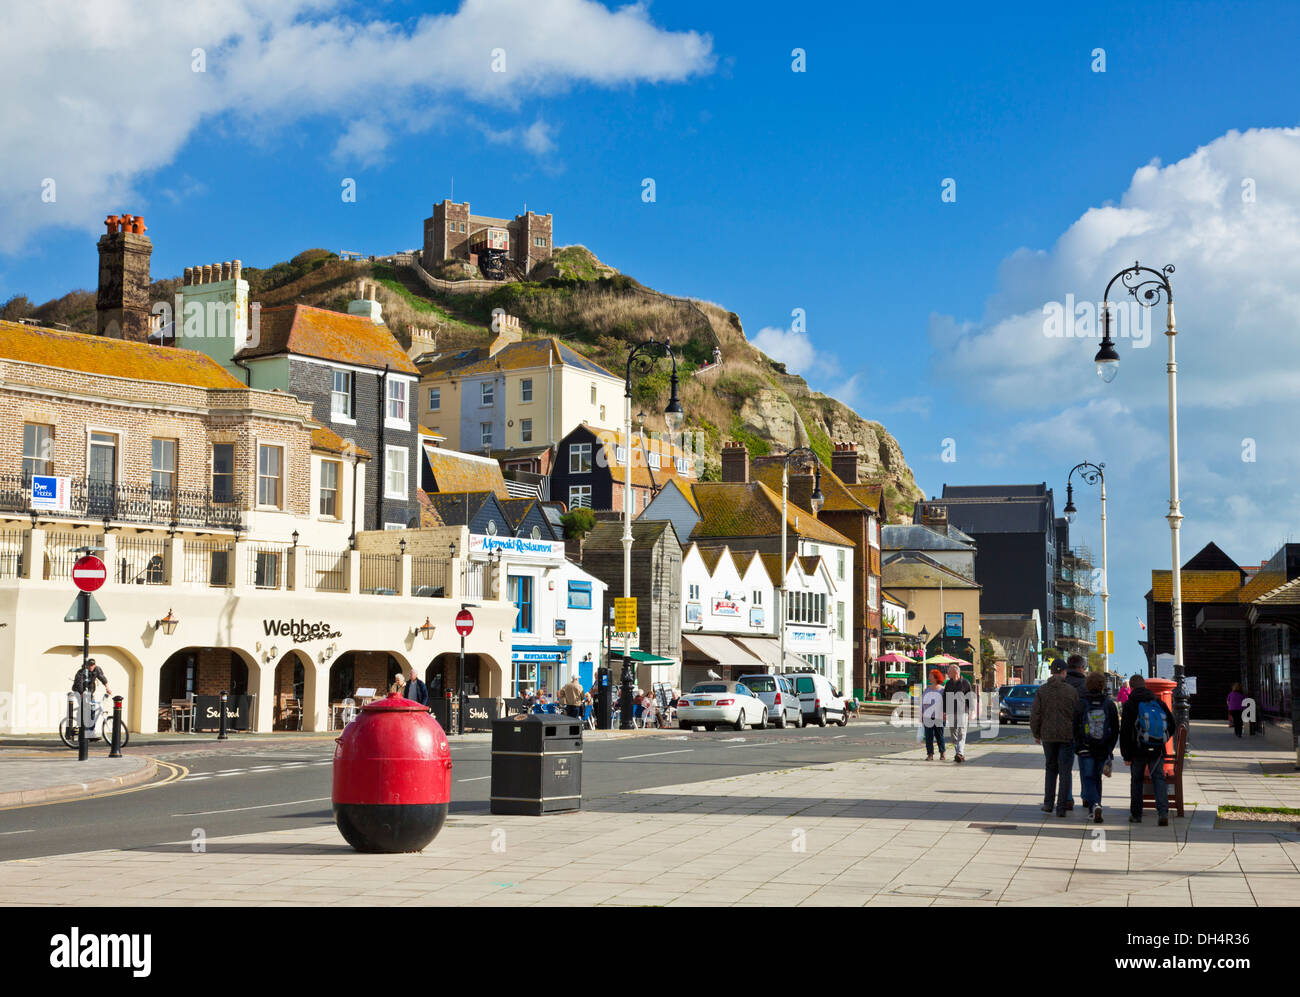 Hastings Old Town und Funicular Cliff Beach Railway in Hastings East Sussex England GB UK Europe Stockfoto